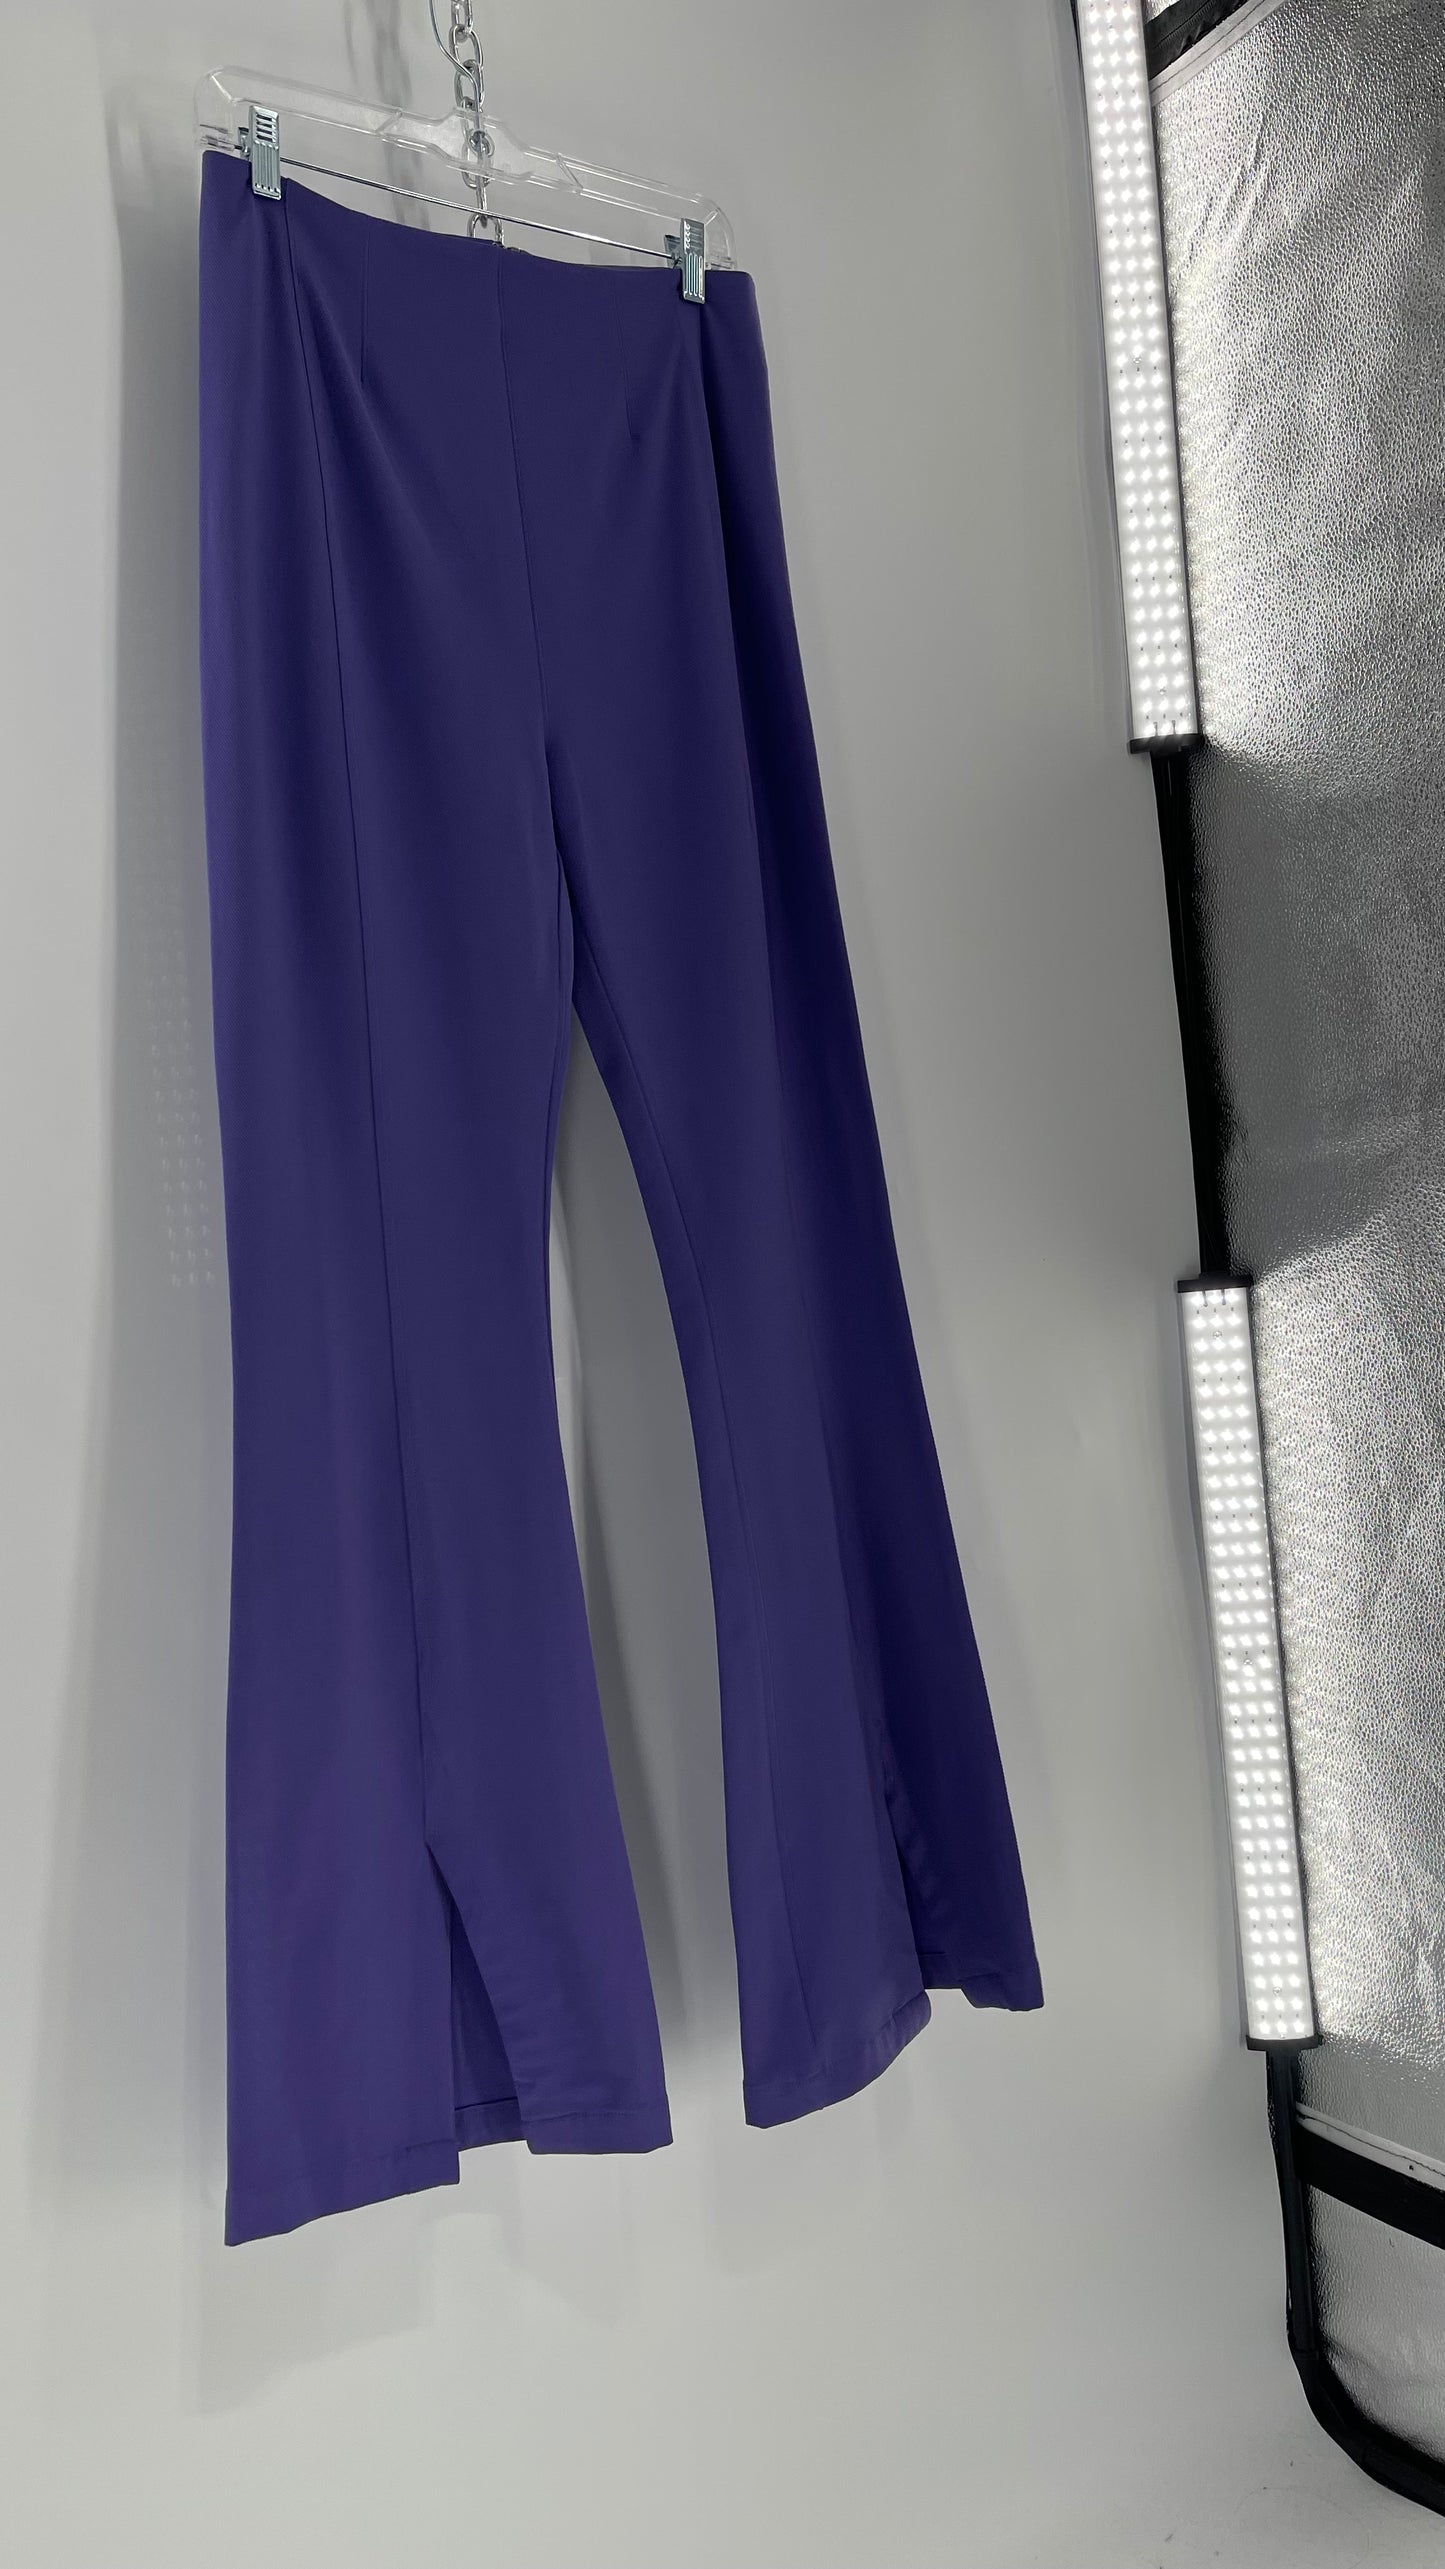 Free People Purple Knit Flares with Pleated Front and Pointed Back Stitching and Vented Hem  (Small)